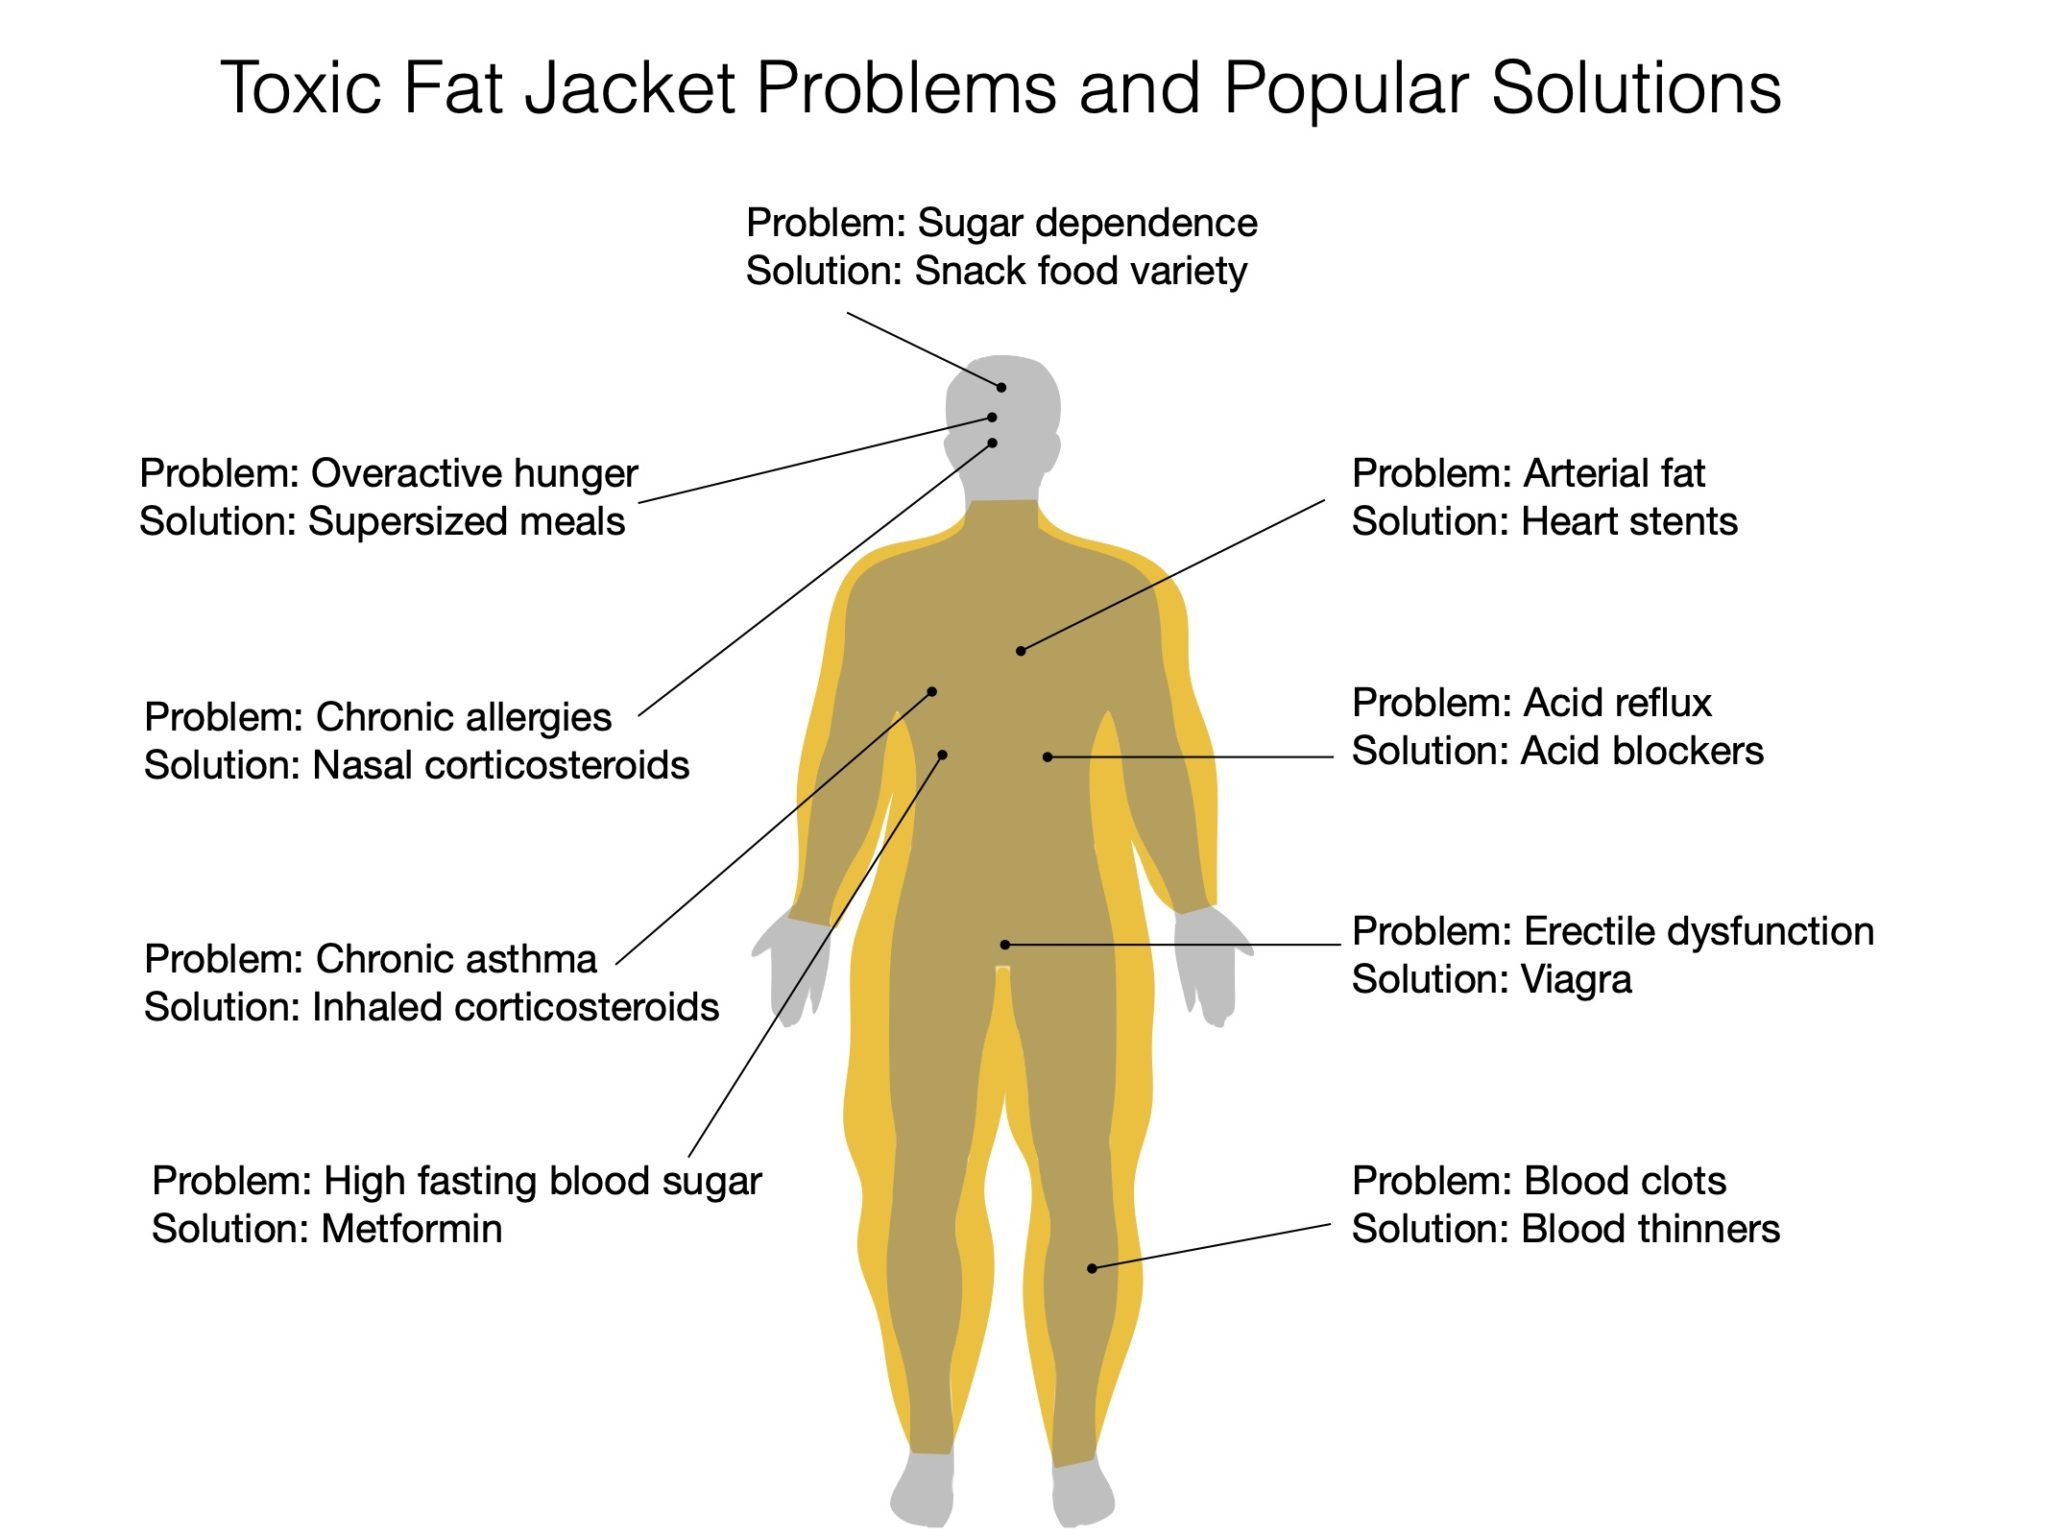 Toxic Fat Jacket Problems and Solutions